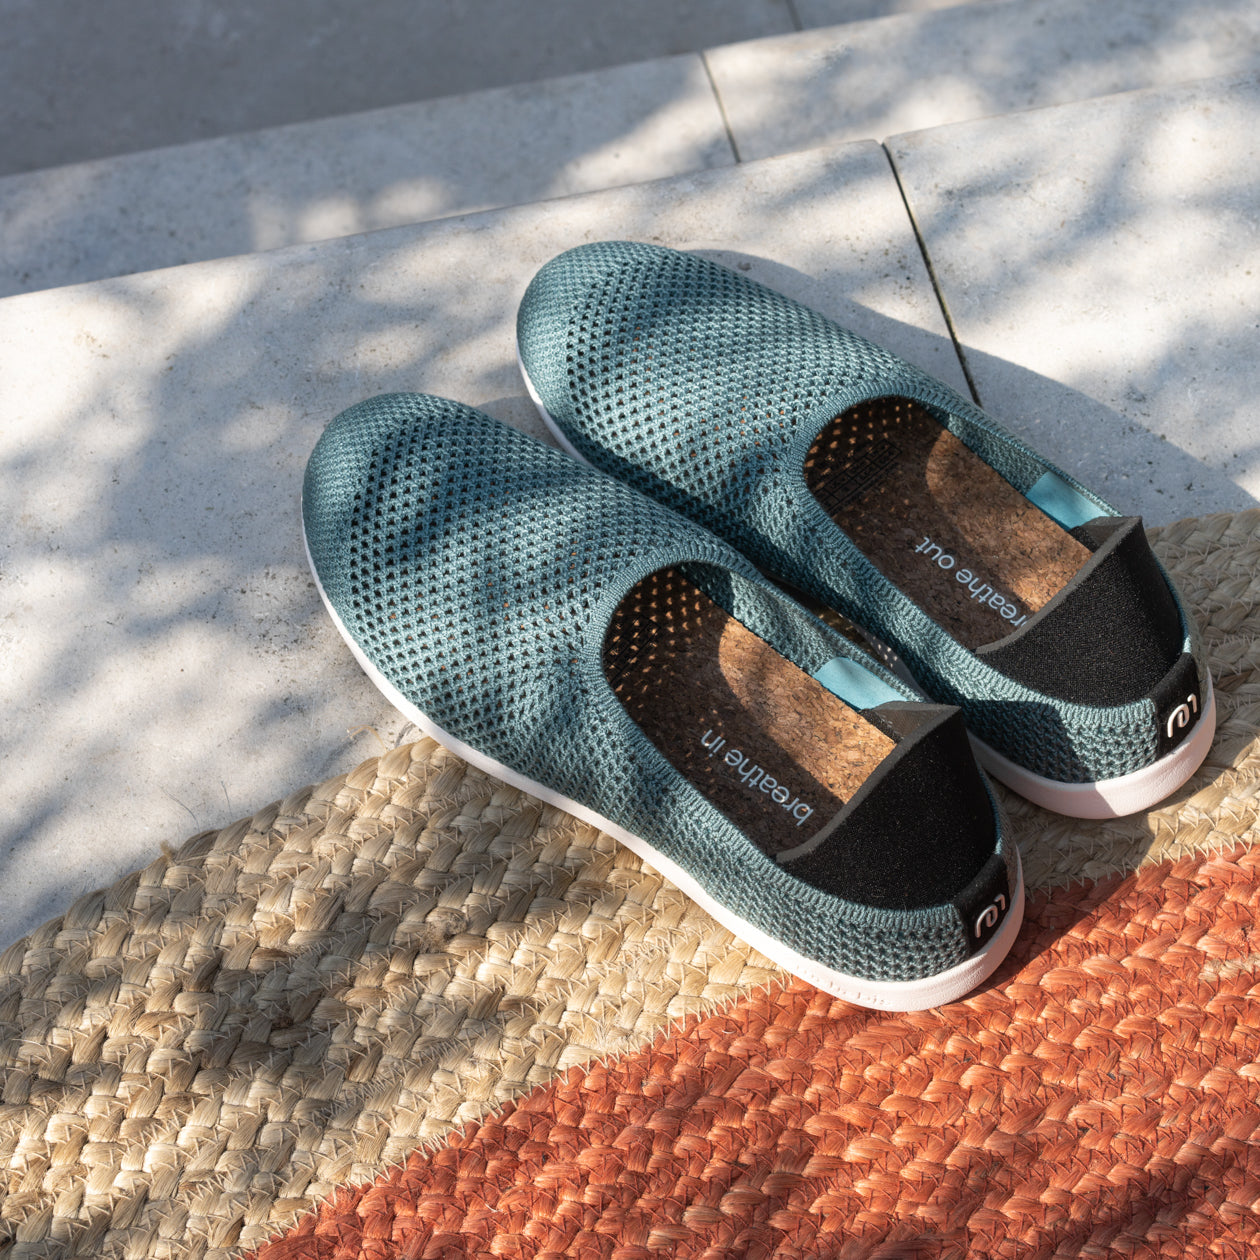 slippers – for time spent